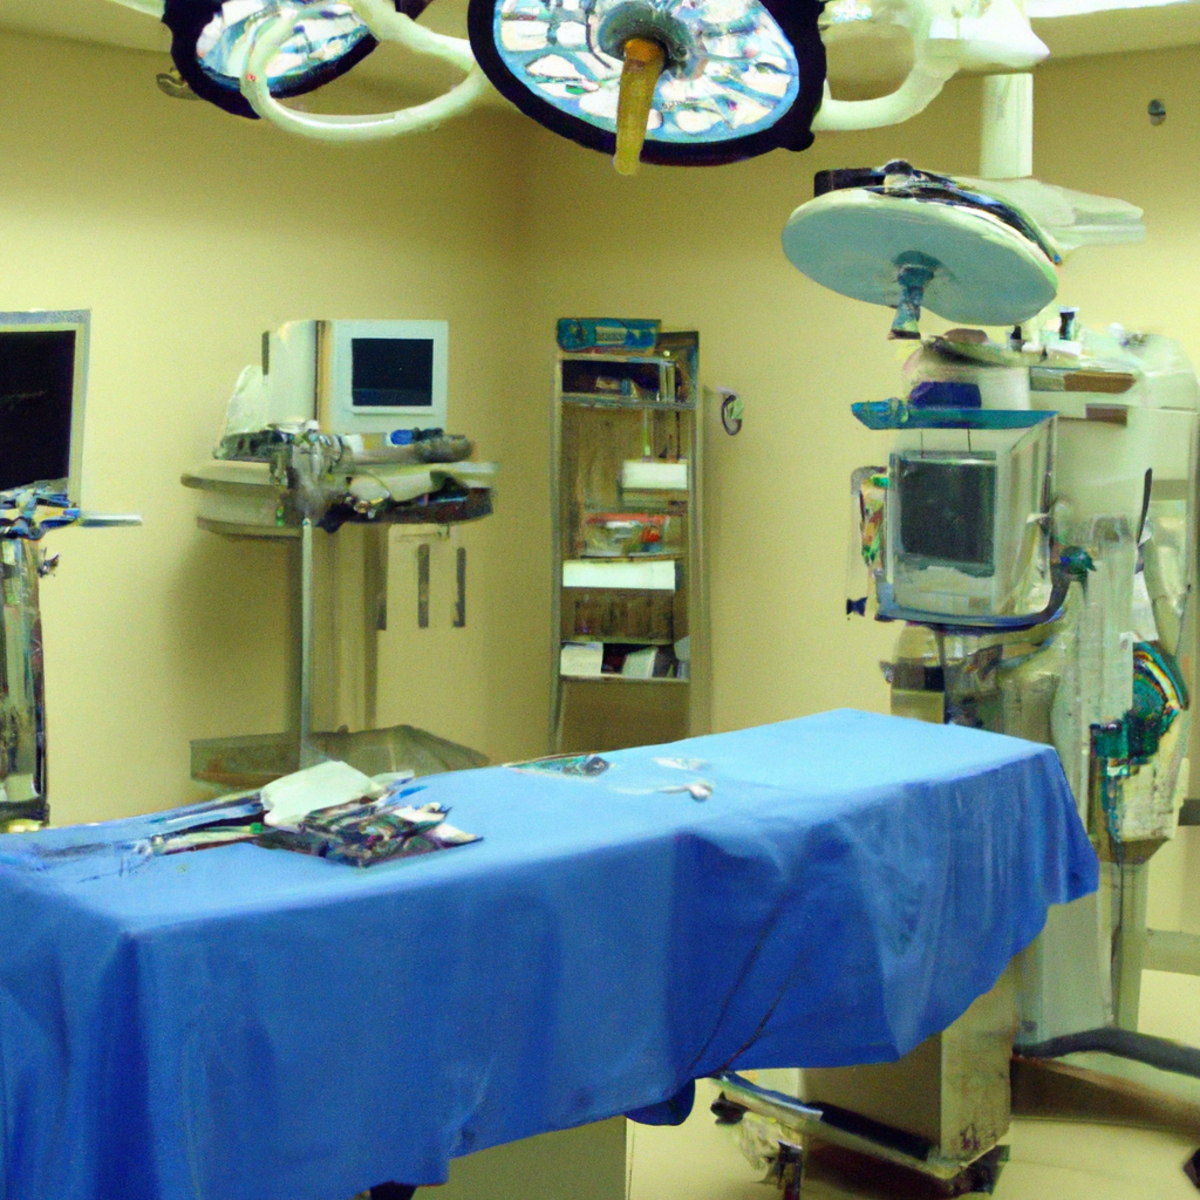 Sterile surgical room with well-lit operating table, laparoscope, and neatly arranged surgical instruments - Gallbladder Agenesis